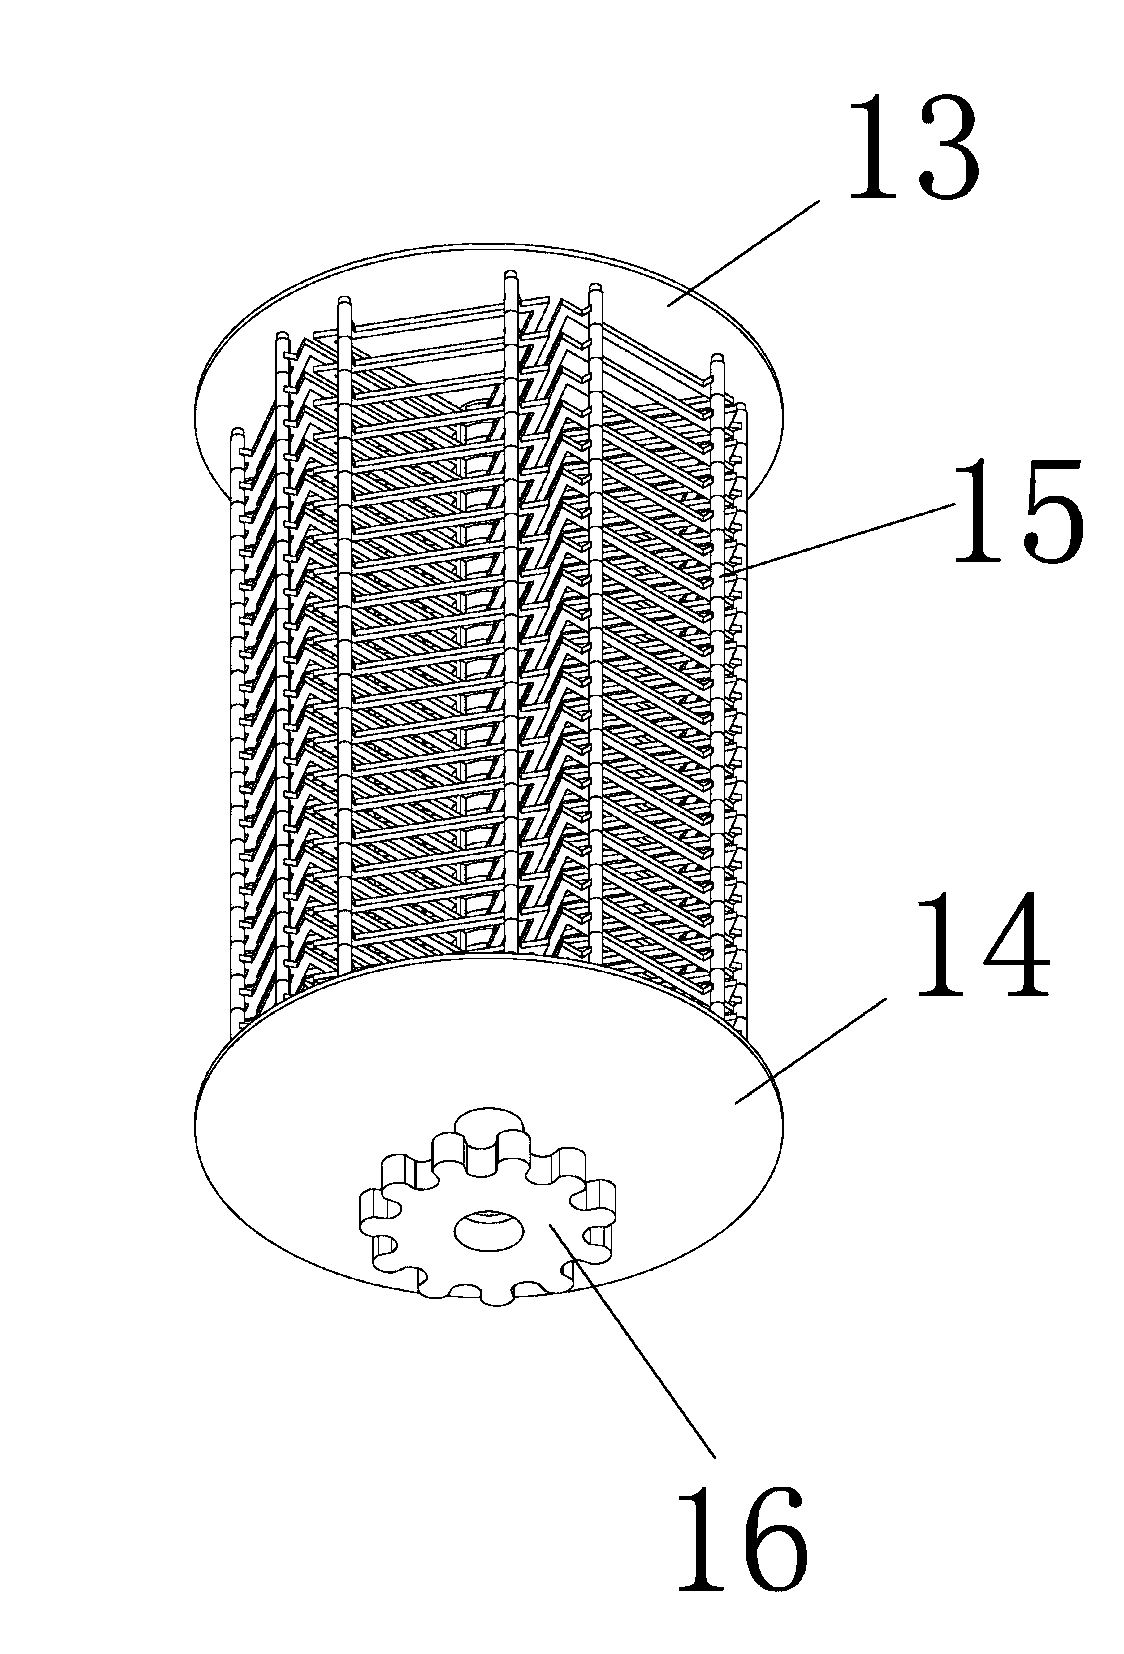 Fan-shaped rotary film separation device